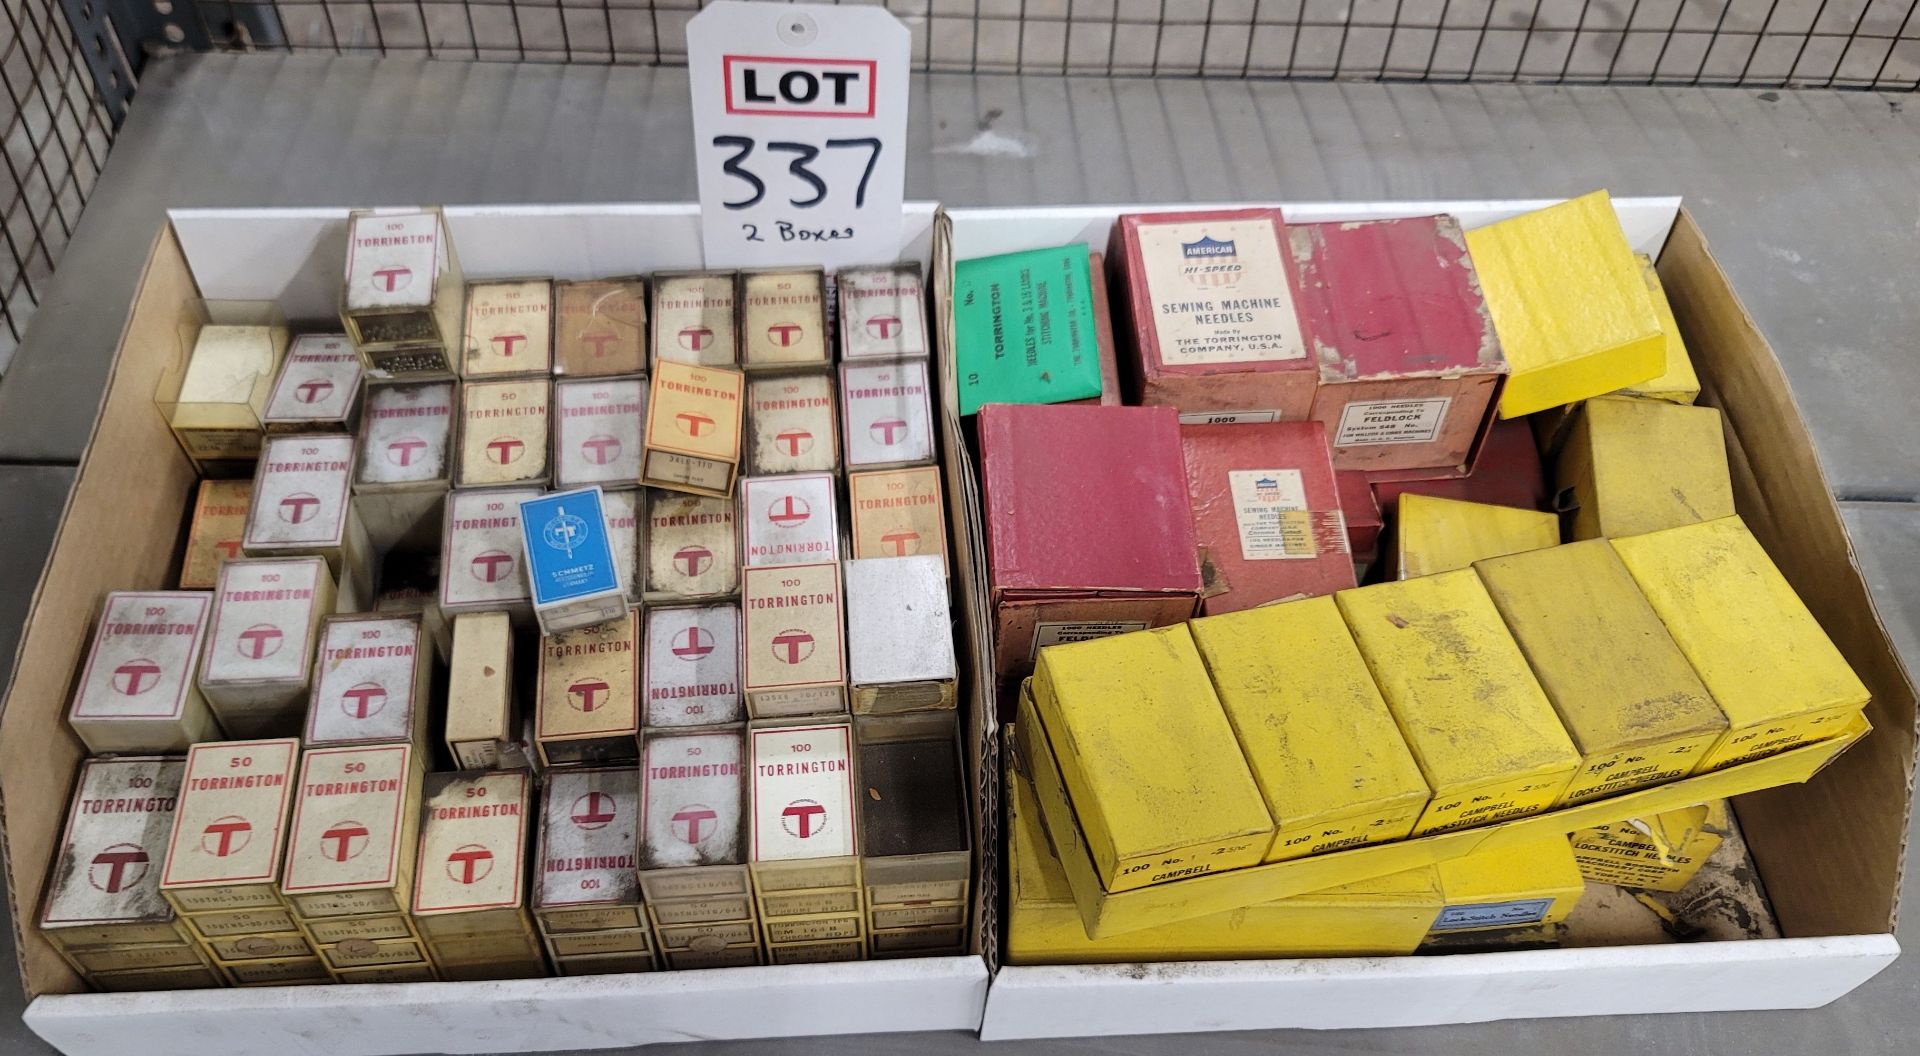 LOT - (2) BOXES OF TORRINGTON INDUSTRIAL SEWING NEEDLES AND LOCKSTITCH NEEDLES